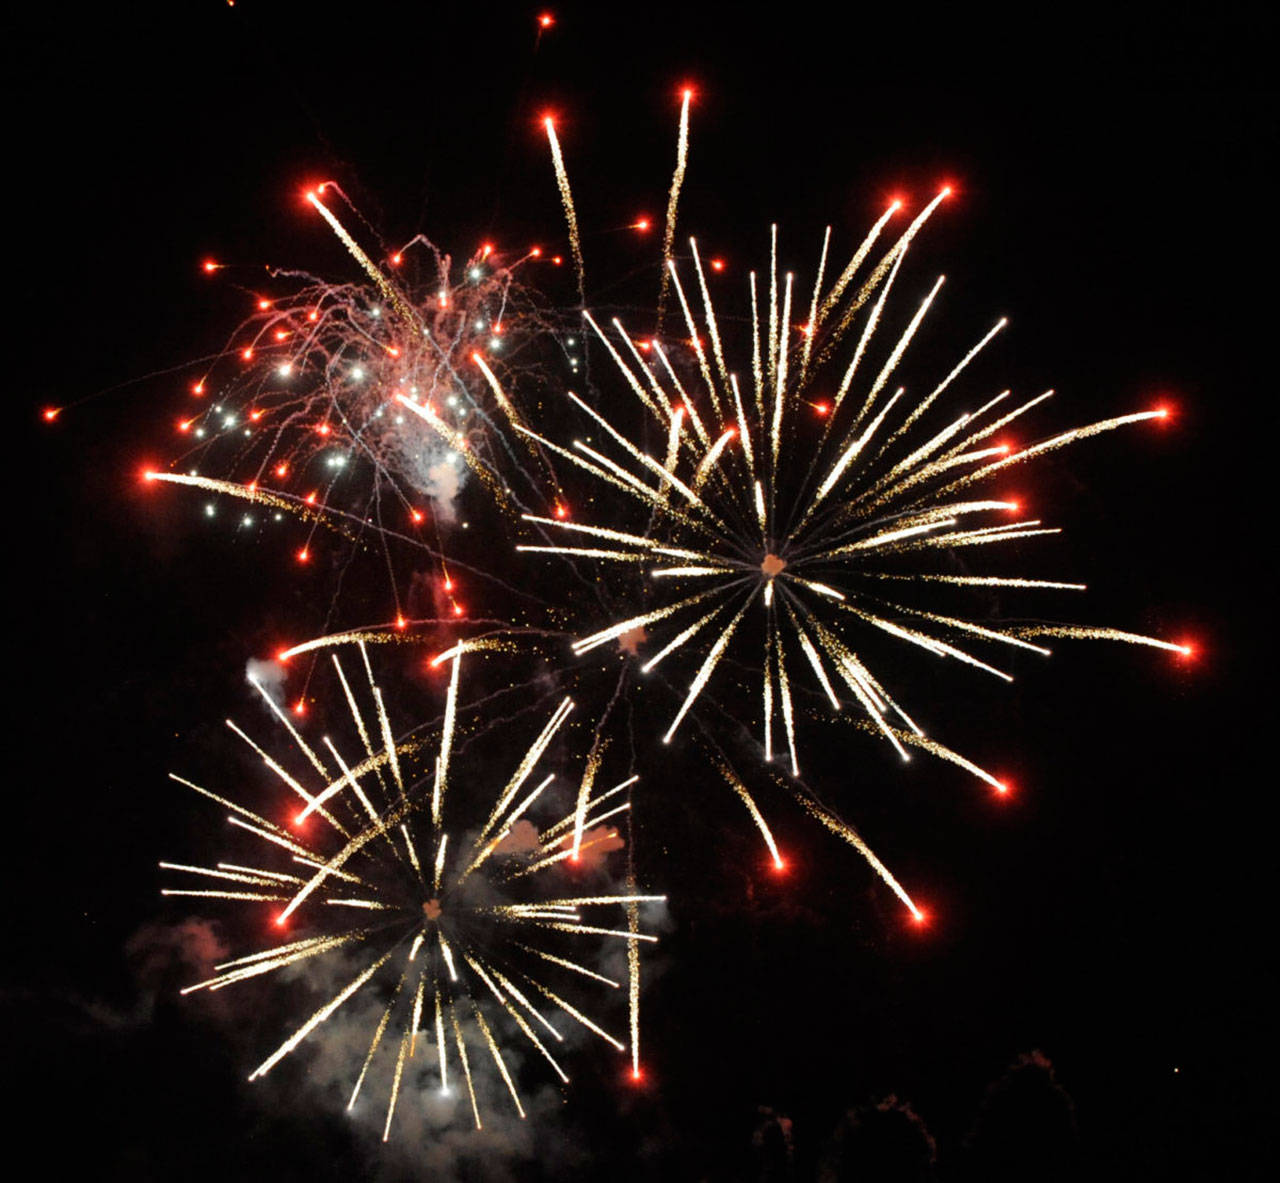 The City of Sequim is bringing a professional fireworks show to Carrie Blake Community Park on Independence Day. In non-pandemic years, Sequim hosted fireworks each May for the Sequim Irrigation Festival Logging Show, as seen here in 2018. Sequim Gazette file photo by Michael Dashiell